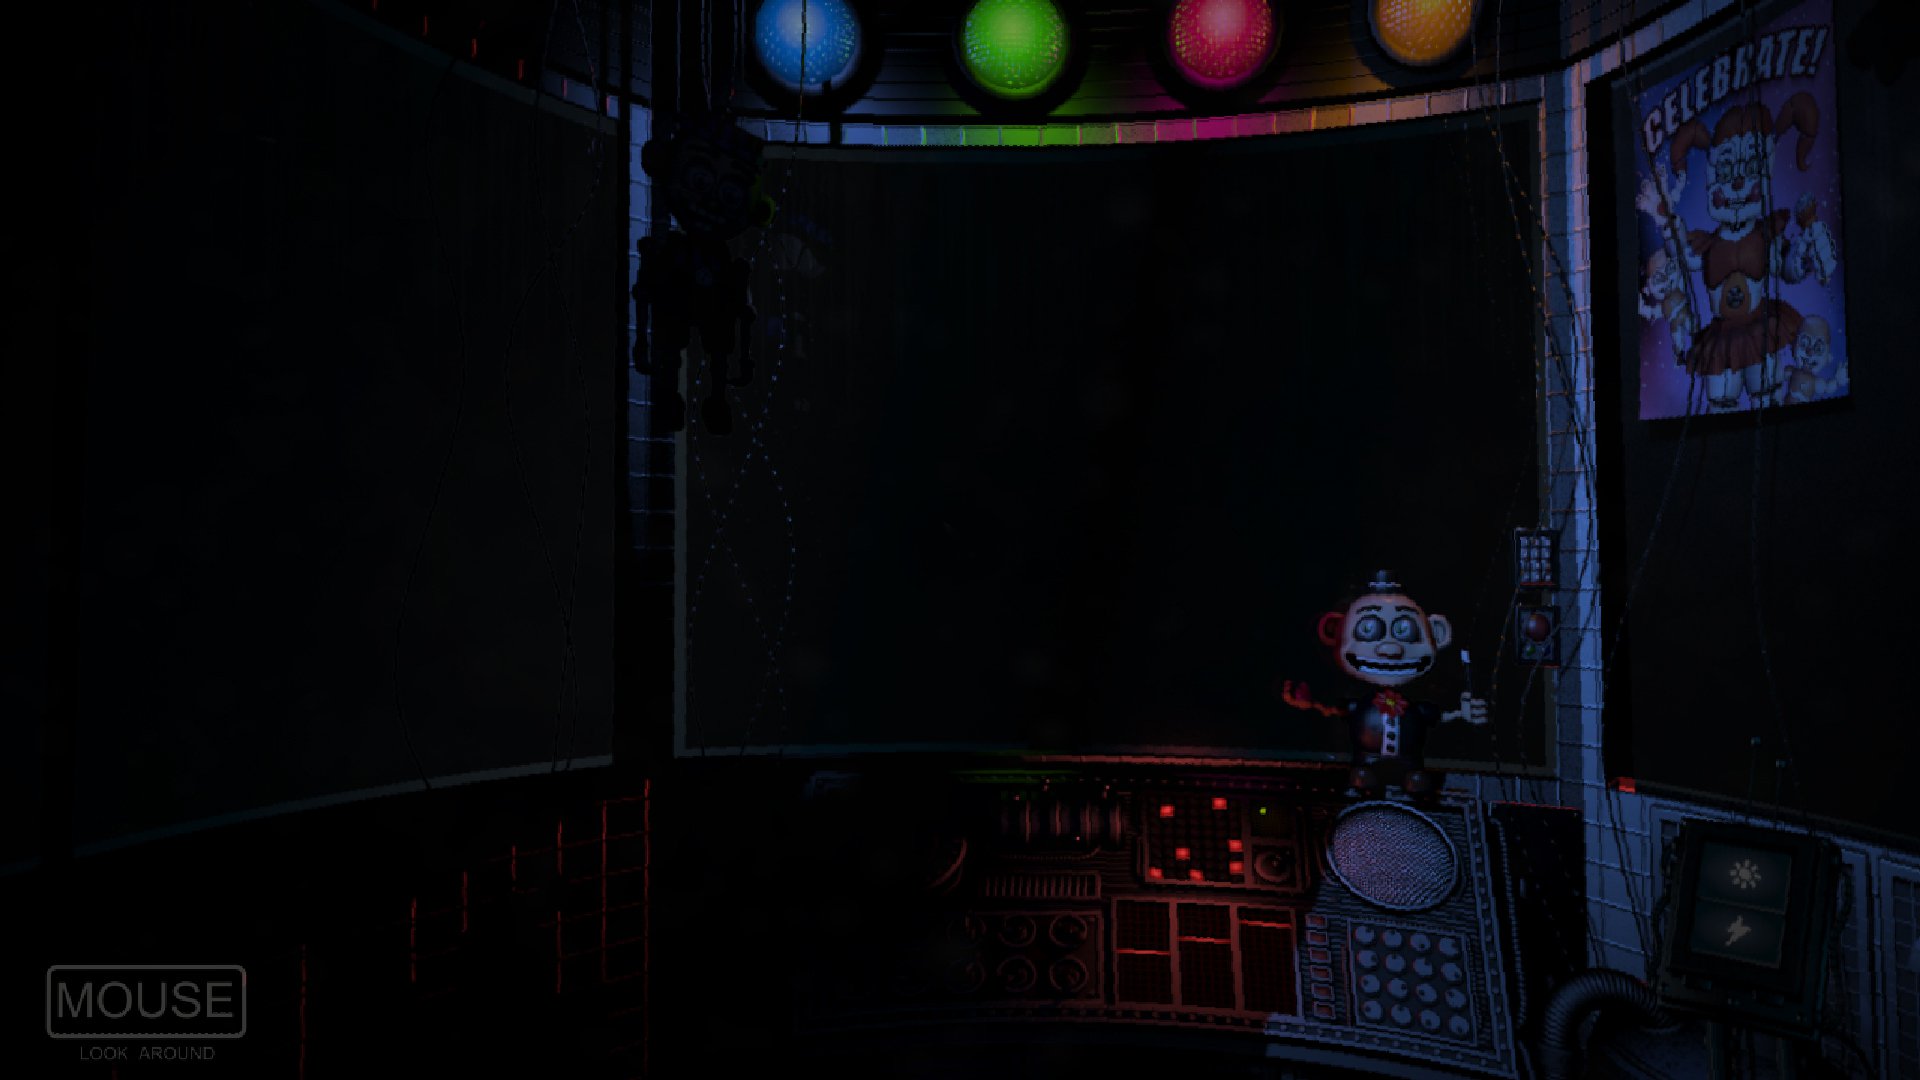 Five Nights at Freddys Sister Location 5